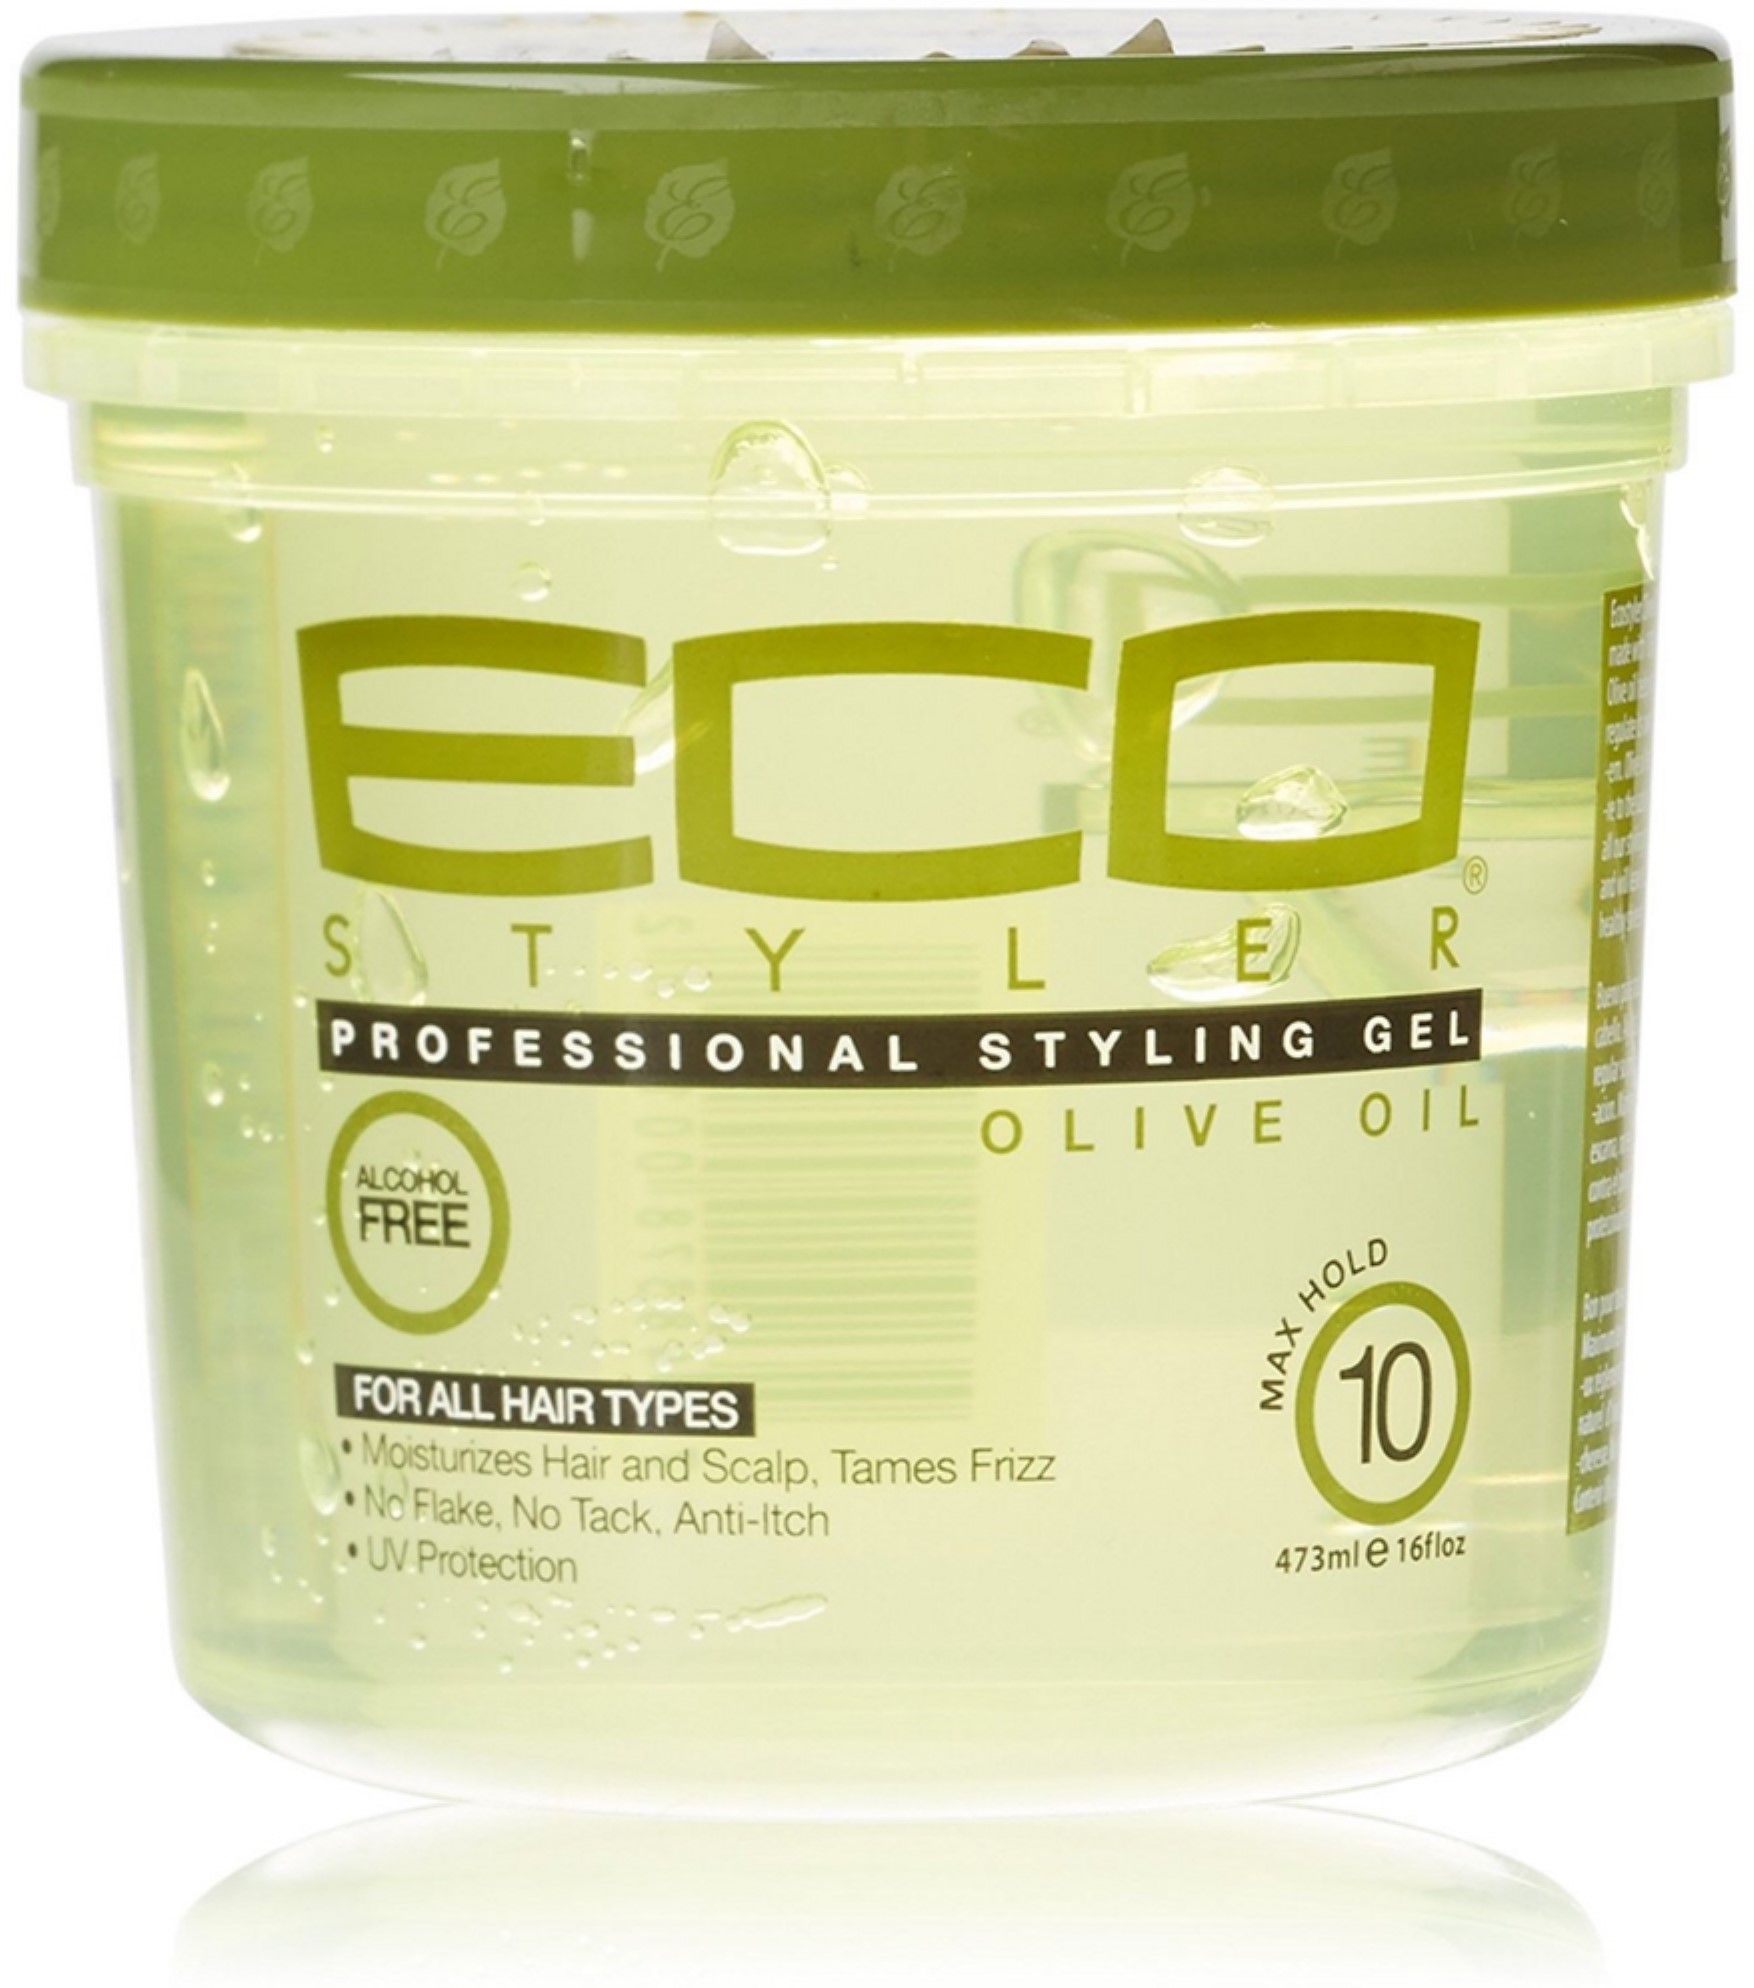 Professional Styling Gel, Olive Oil